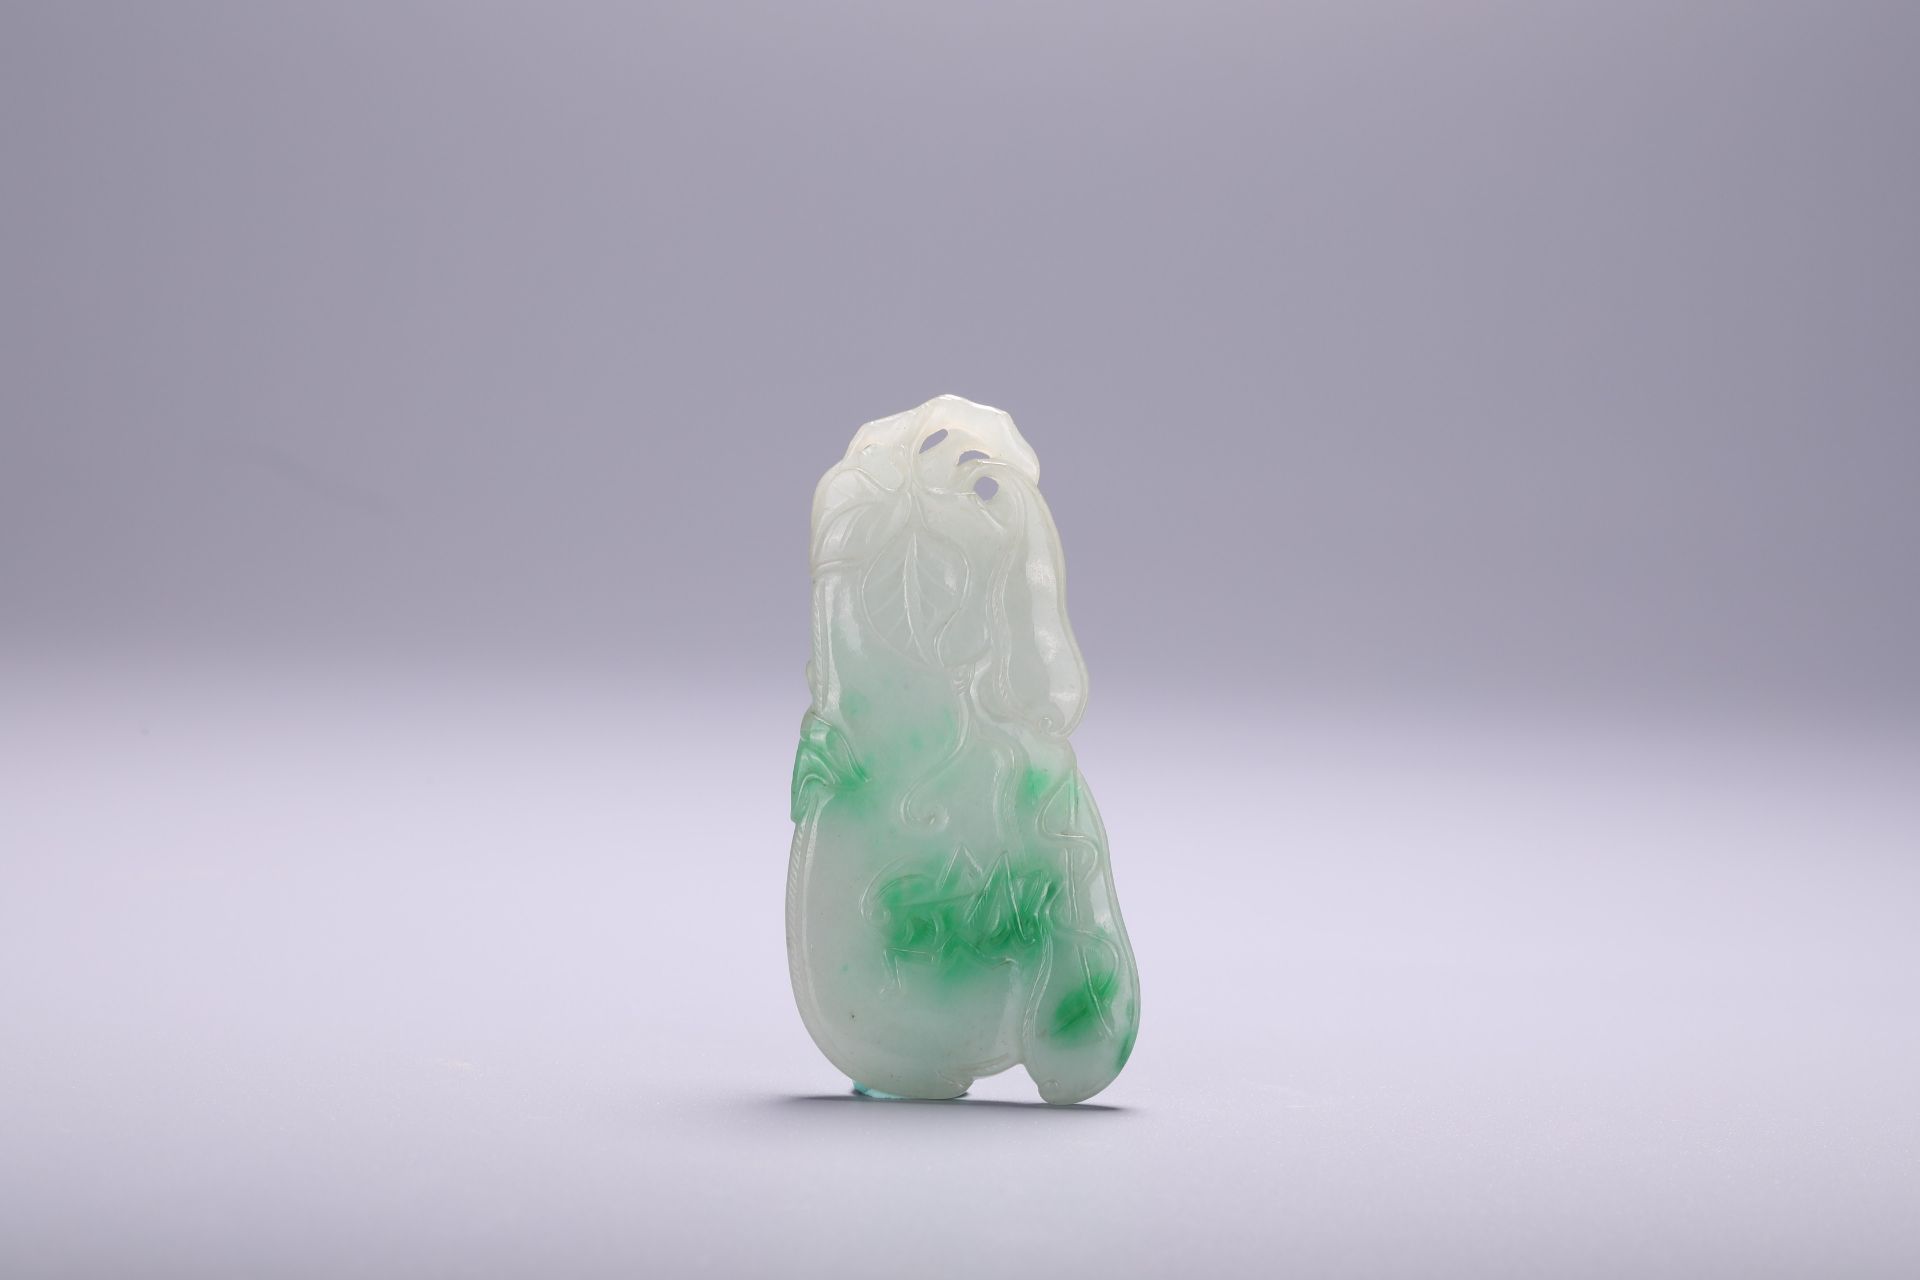 A Chinese jadeite feicui jade carved pendant, L 7 - W 3,5 cm